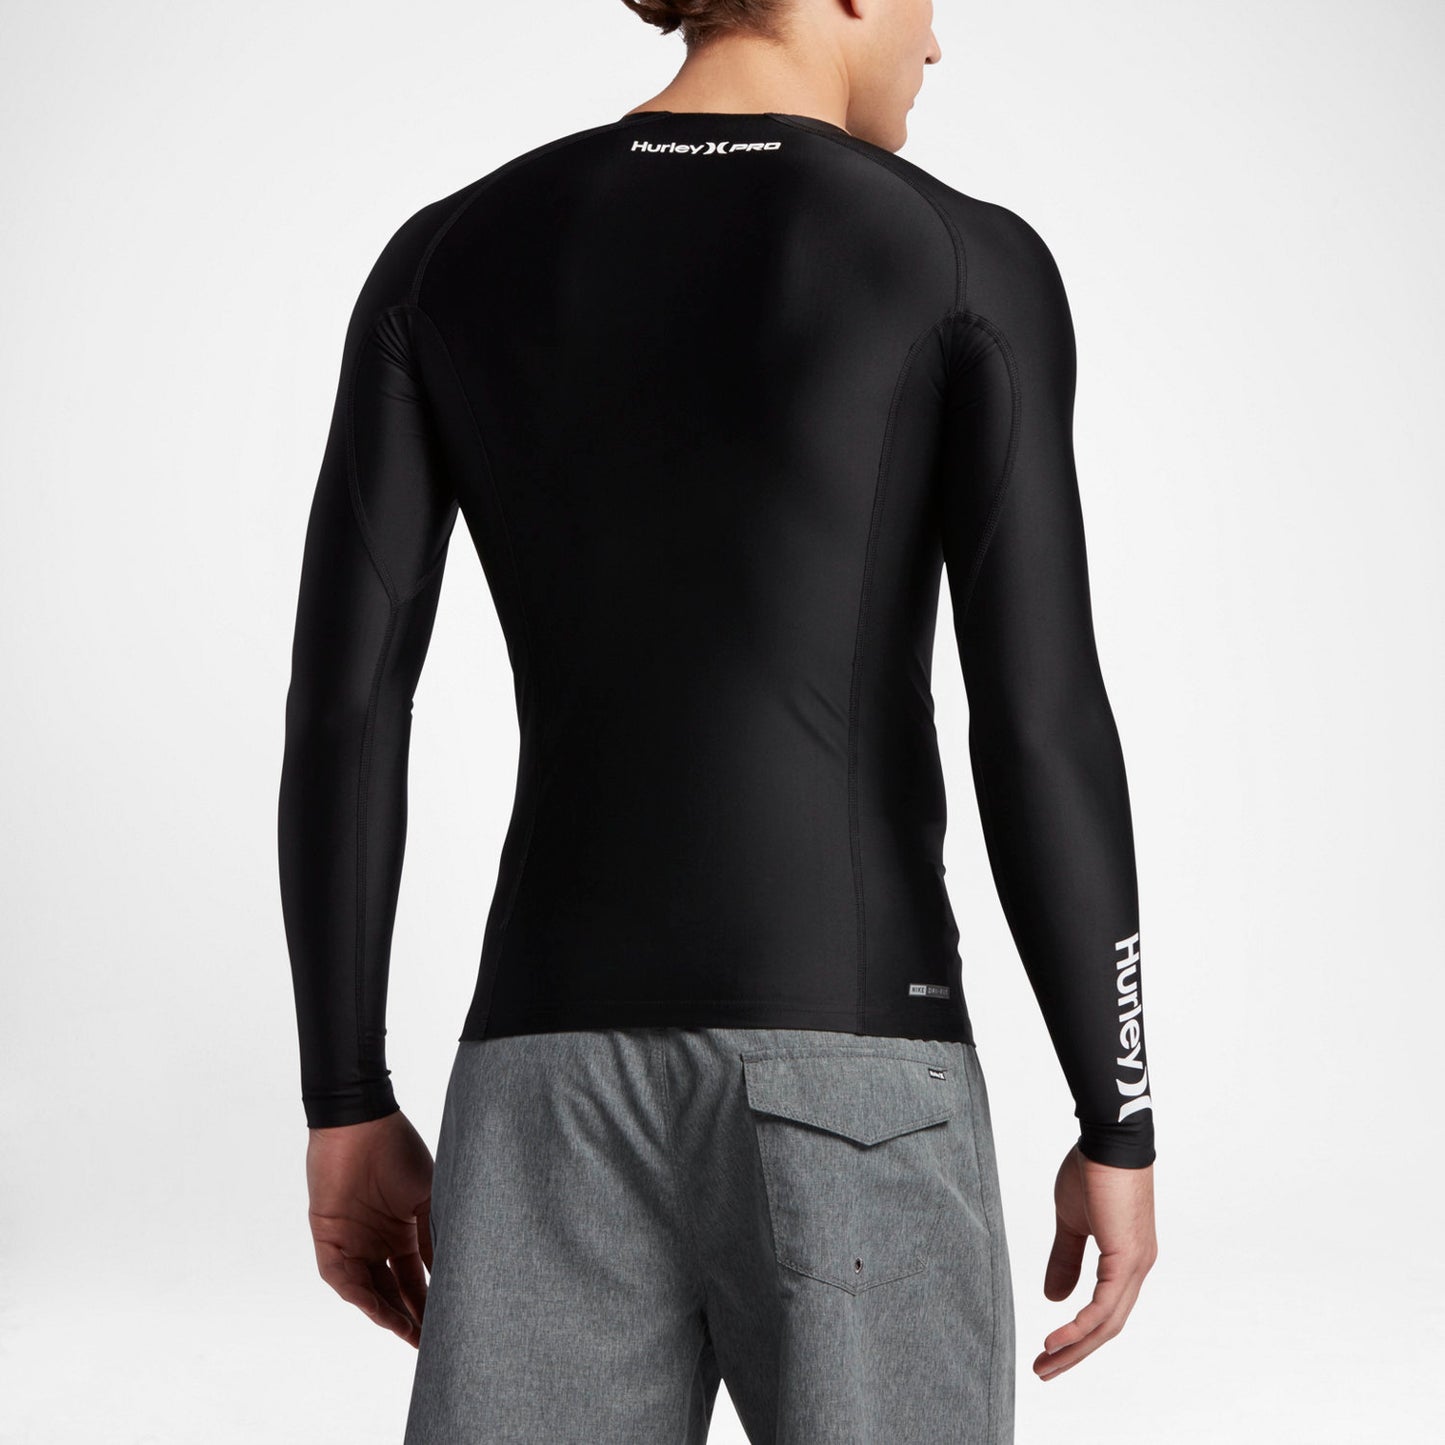 Compression Rash Guards – Ocean Tec  Wetsuits and Rashguards Made in the  USA